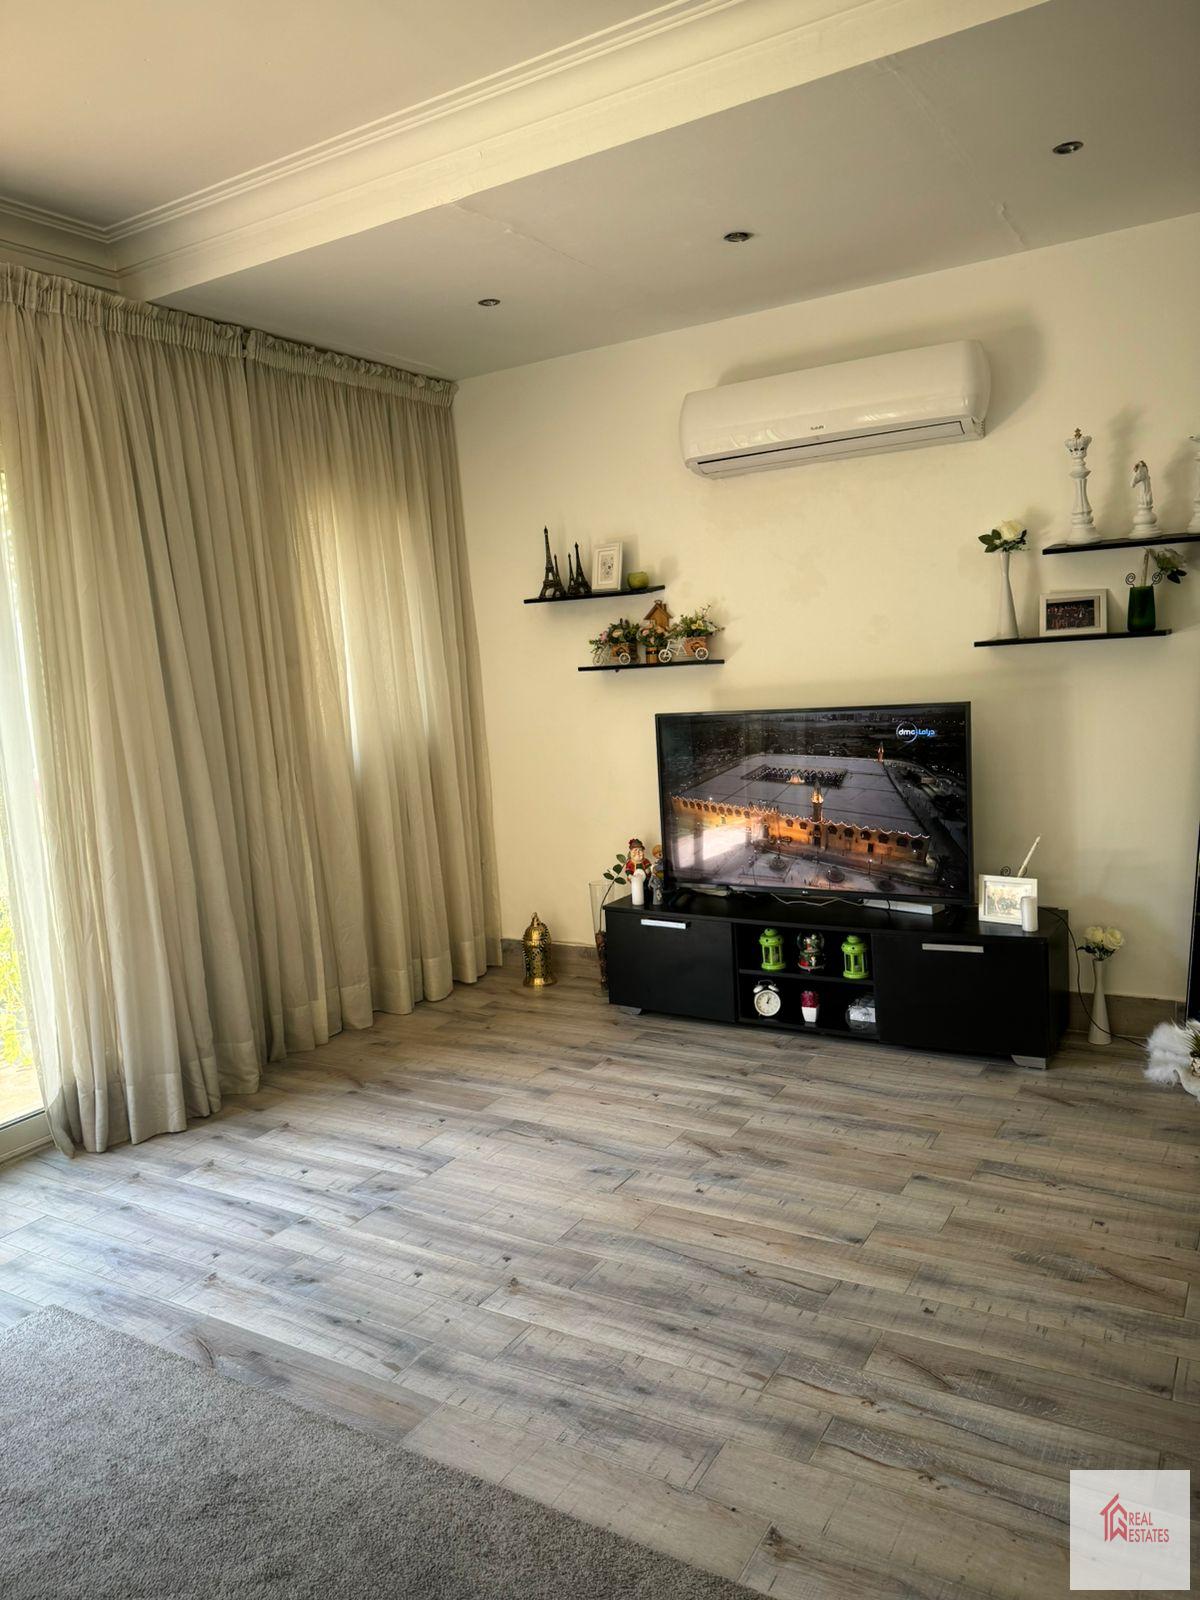 The modern apartment on the ground floor in House in Katameya Heights Extension contains 3 bedrooms, 3 bathrooms, a large living room open to the kitchen fully furnished garden. I have an apartment rent Katameya Heights